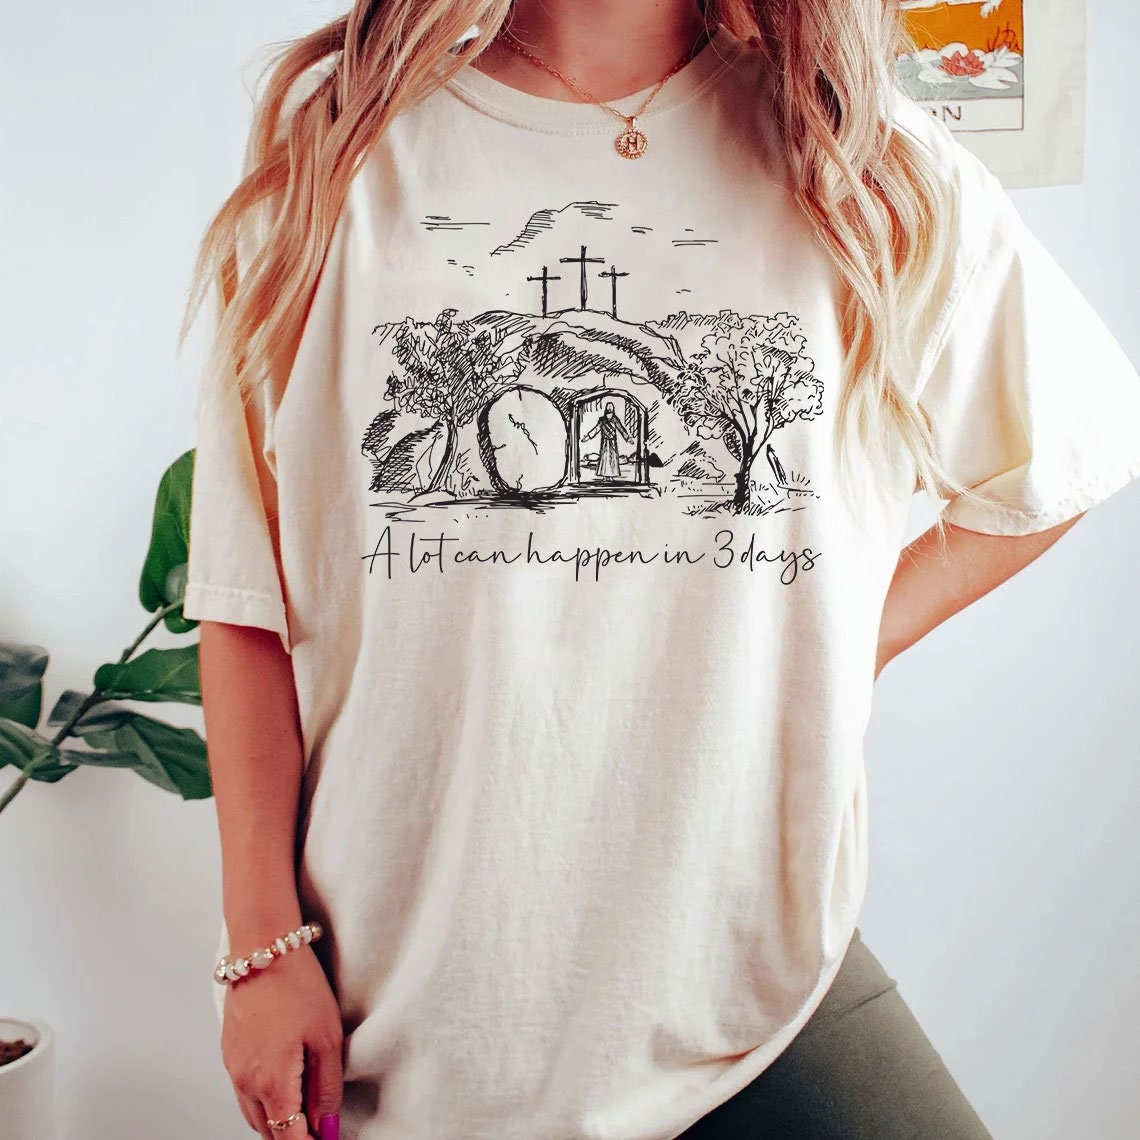 A Lot Can Happen In 3 Days Shirt, Easter Gifts, Gift For Christian